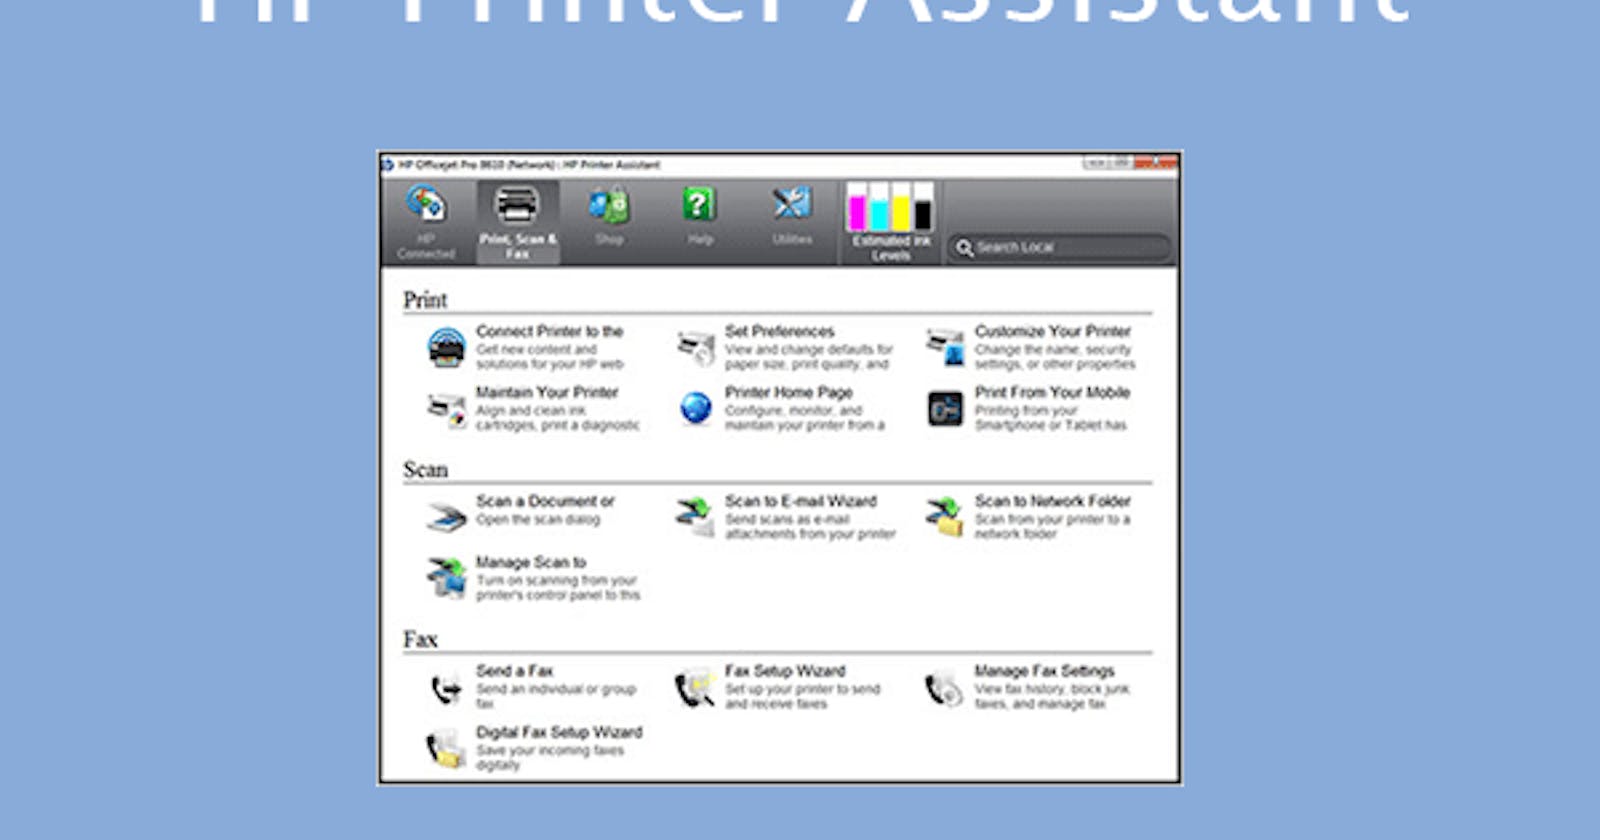 How to Fix HP Printer Assistant Not Working Problem?